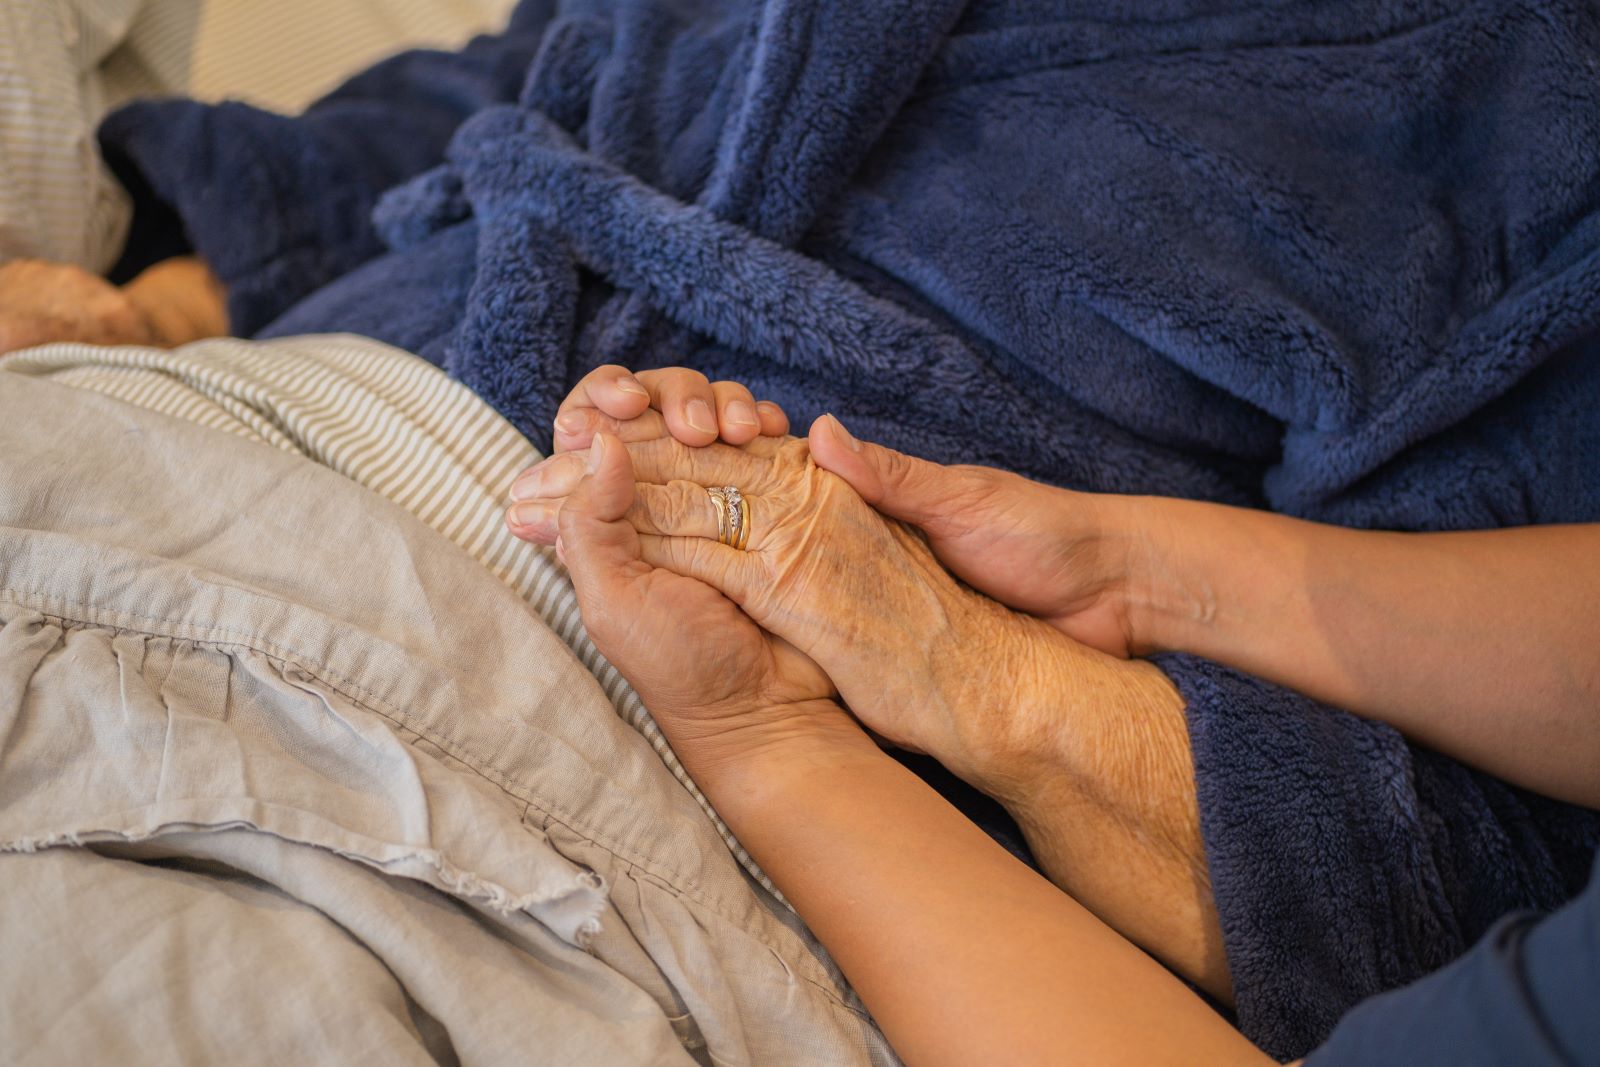 A woman holds the hand of an elderly woman.